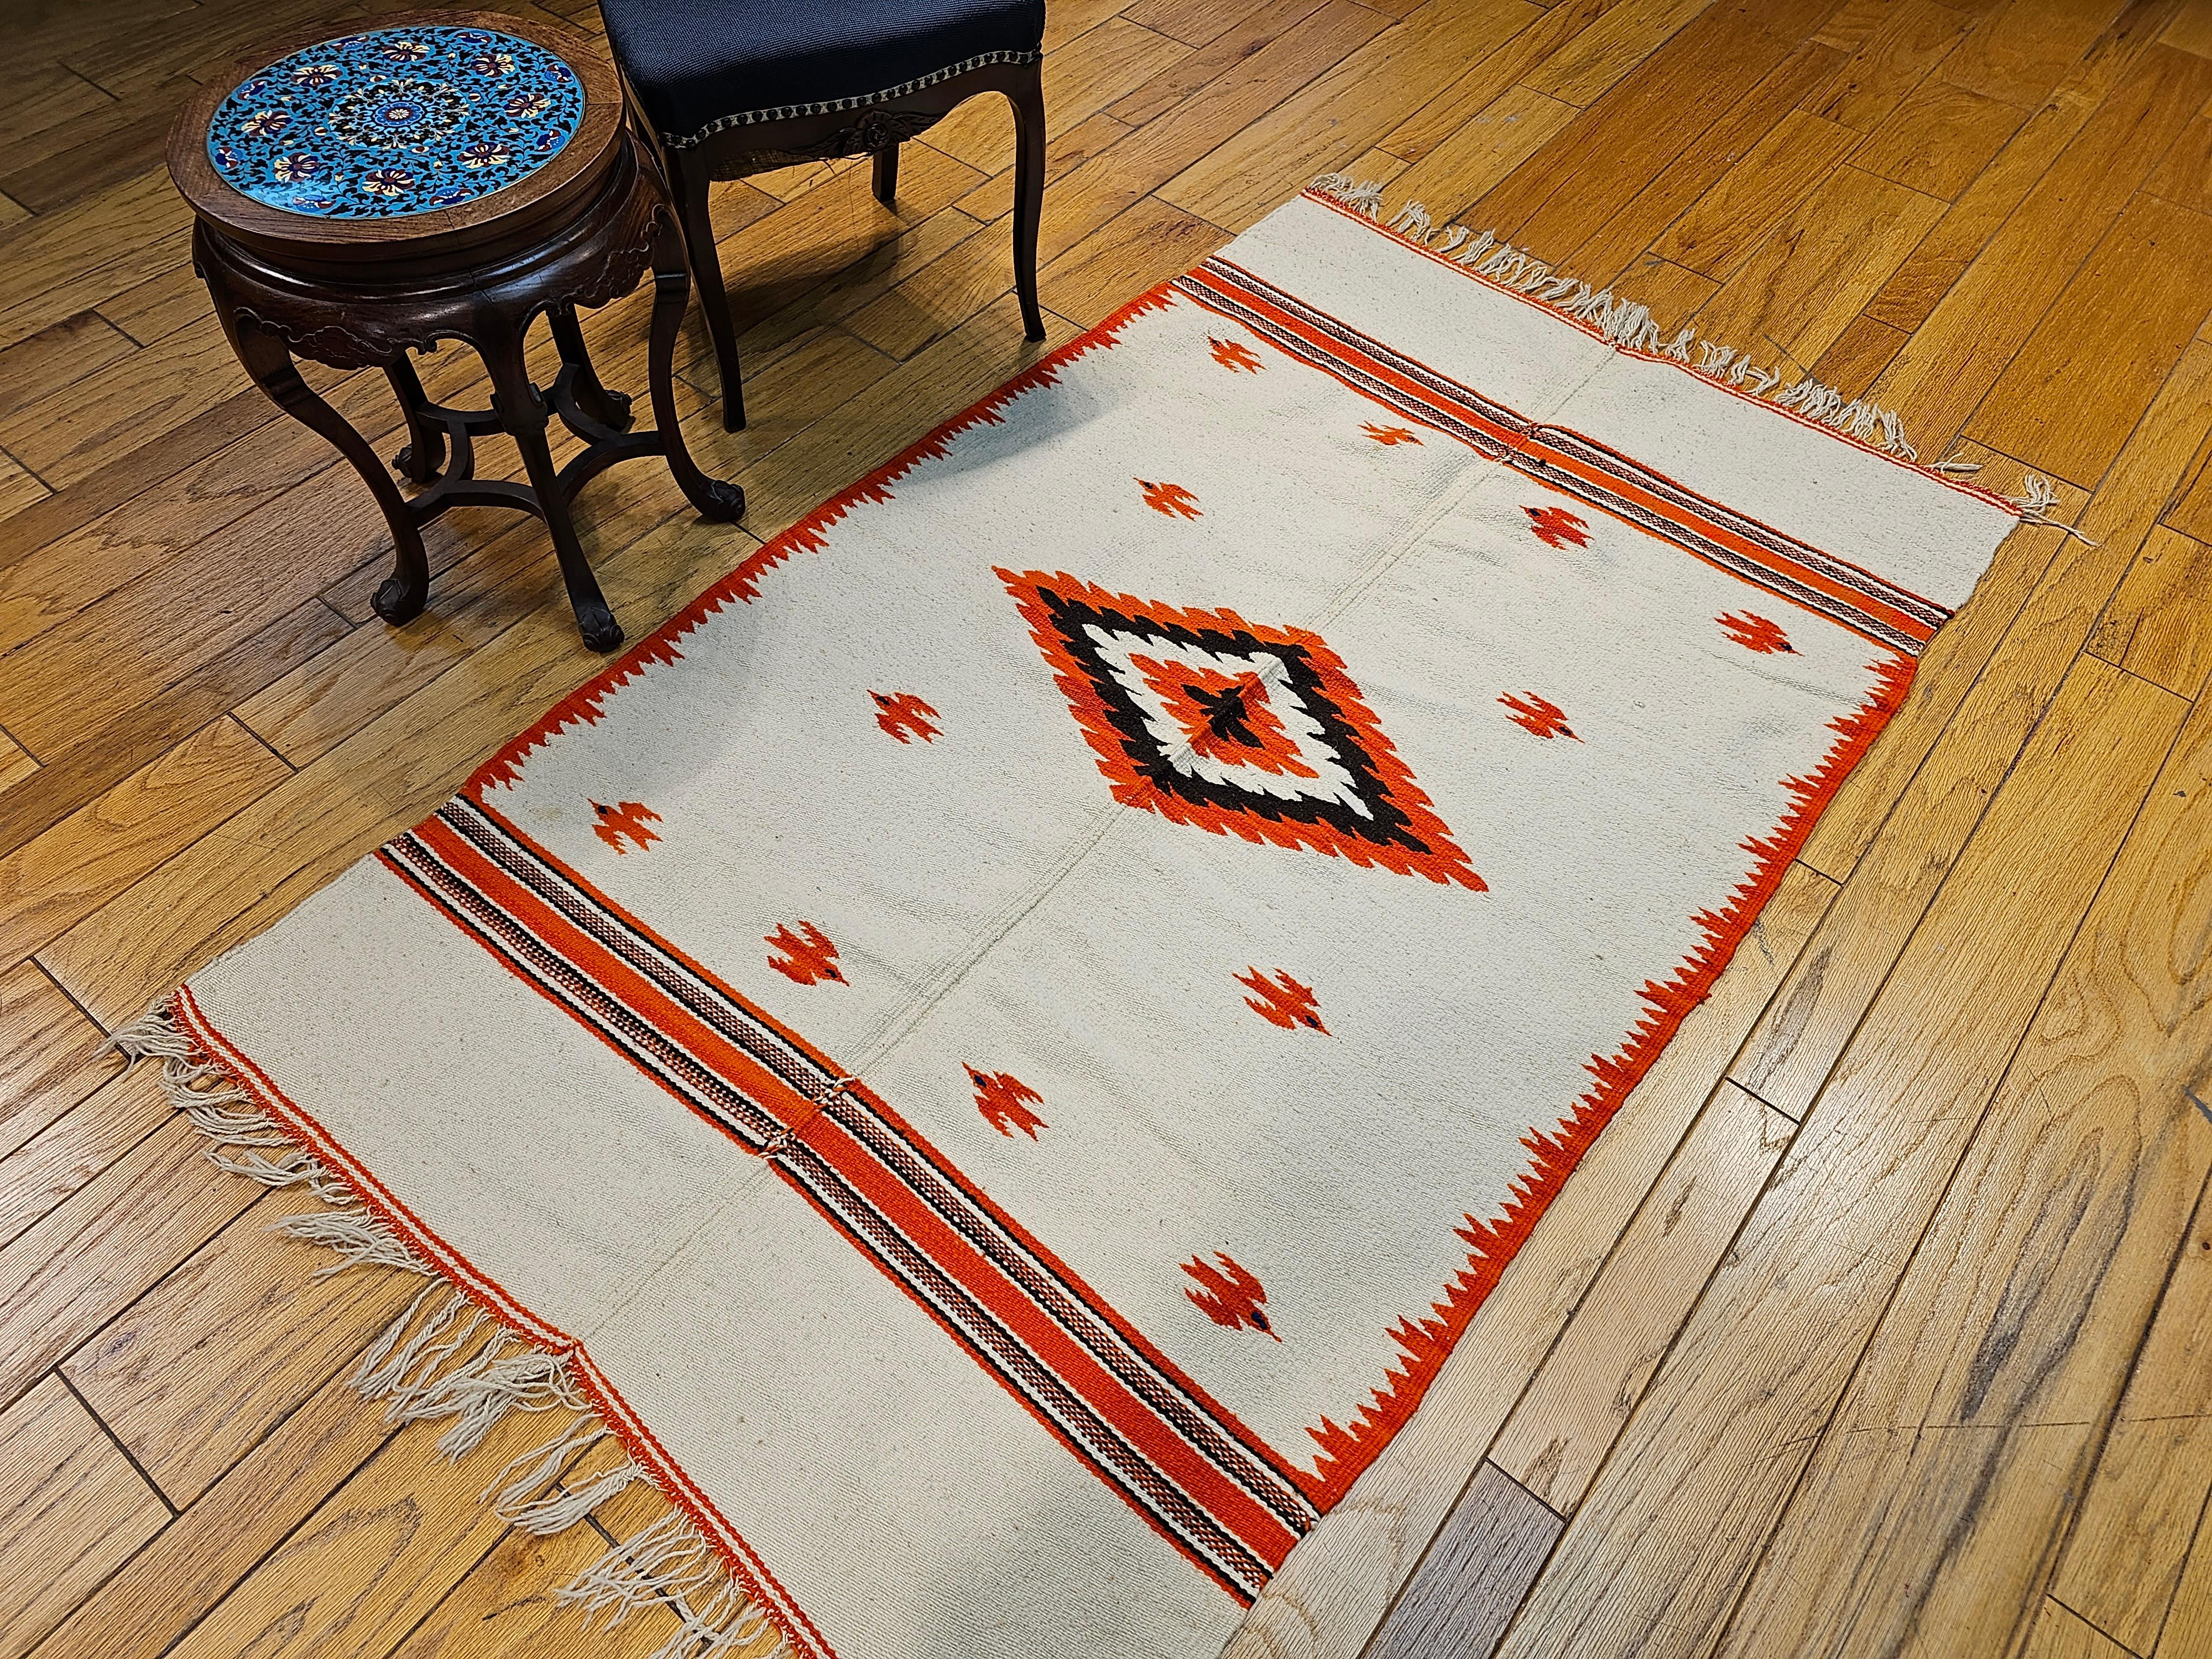 Vintage Mexican Serape Saltillo Kilim Rug with Mythical Bird Designs For Sale 6